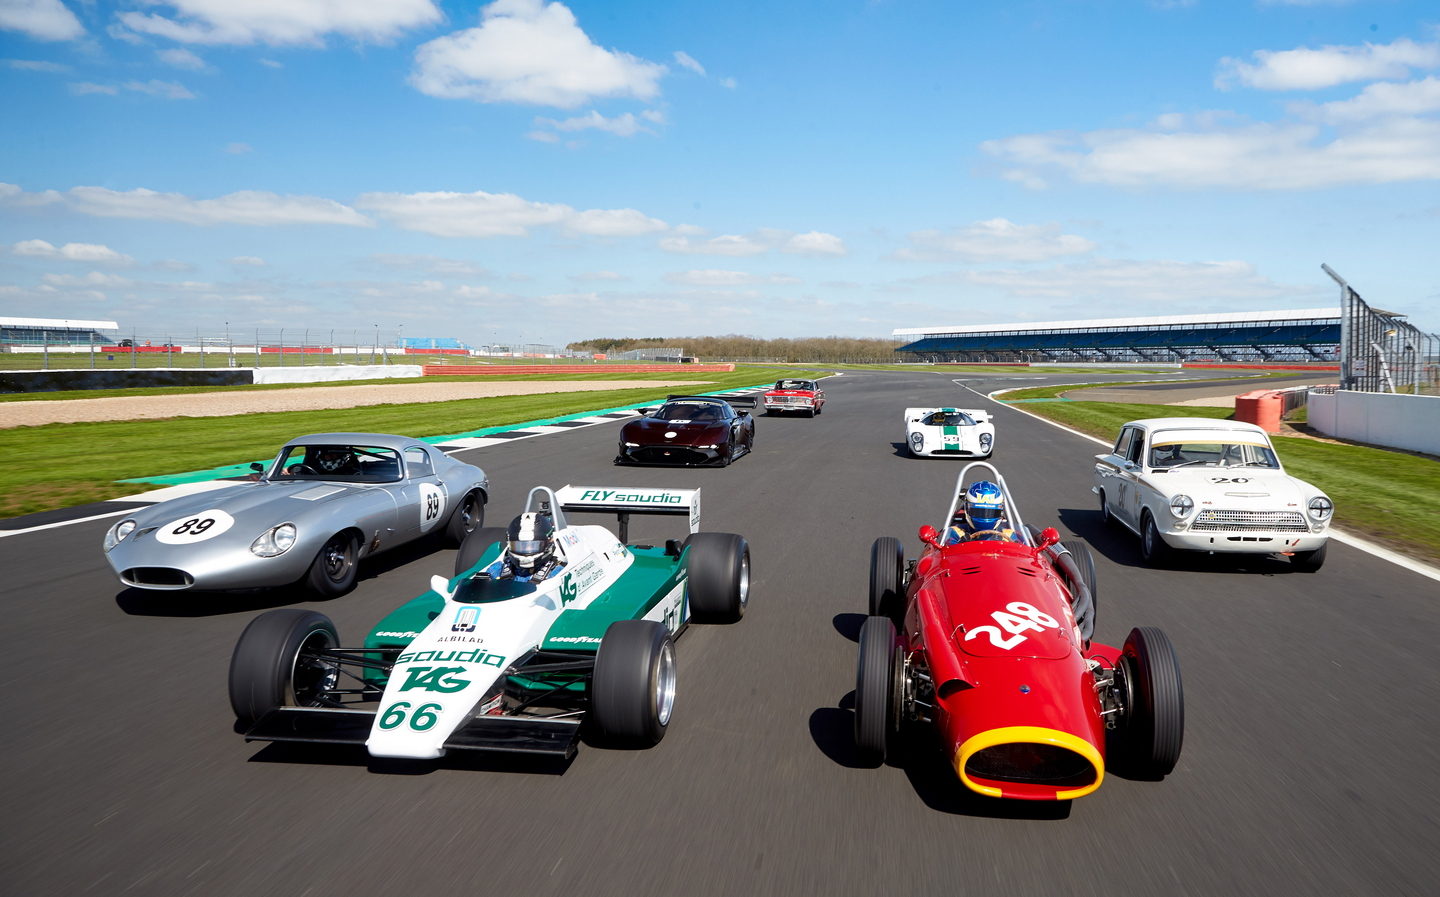 The-full-spectrum-of-motor-sport-history-will-be-renewing-old-rivalries-at-Silverstone-Festival